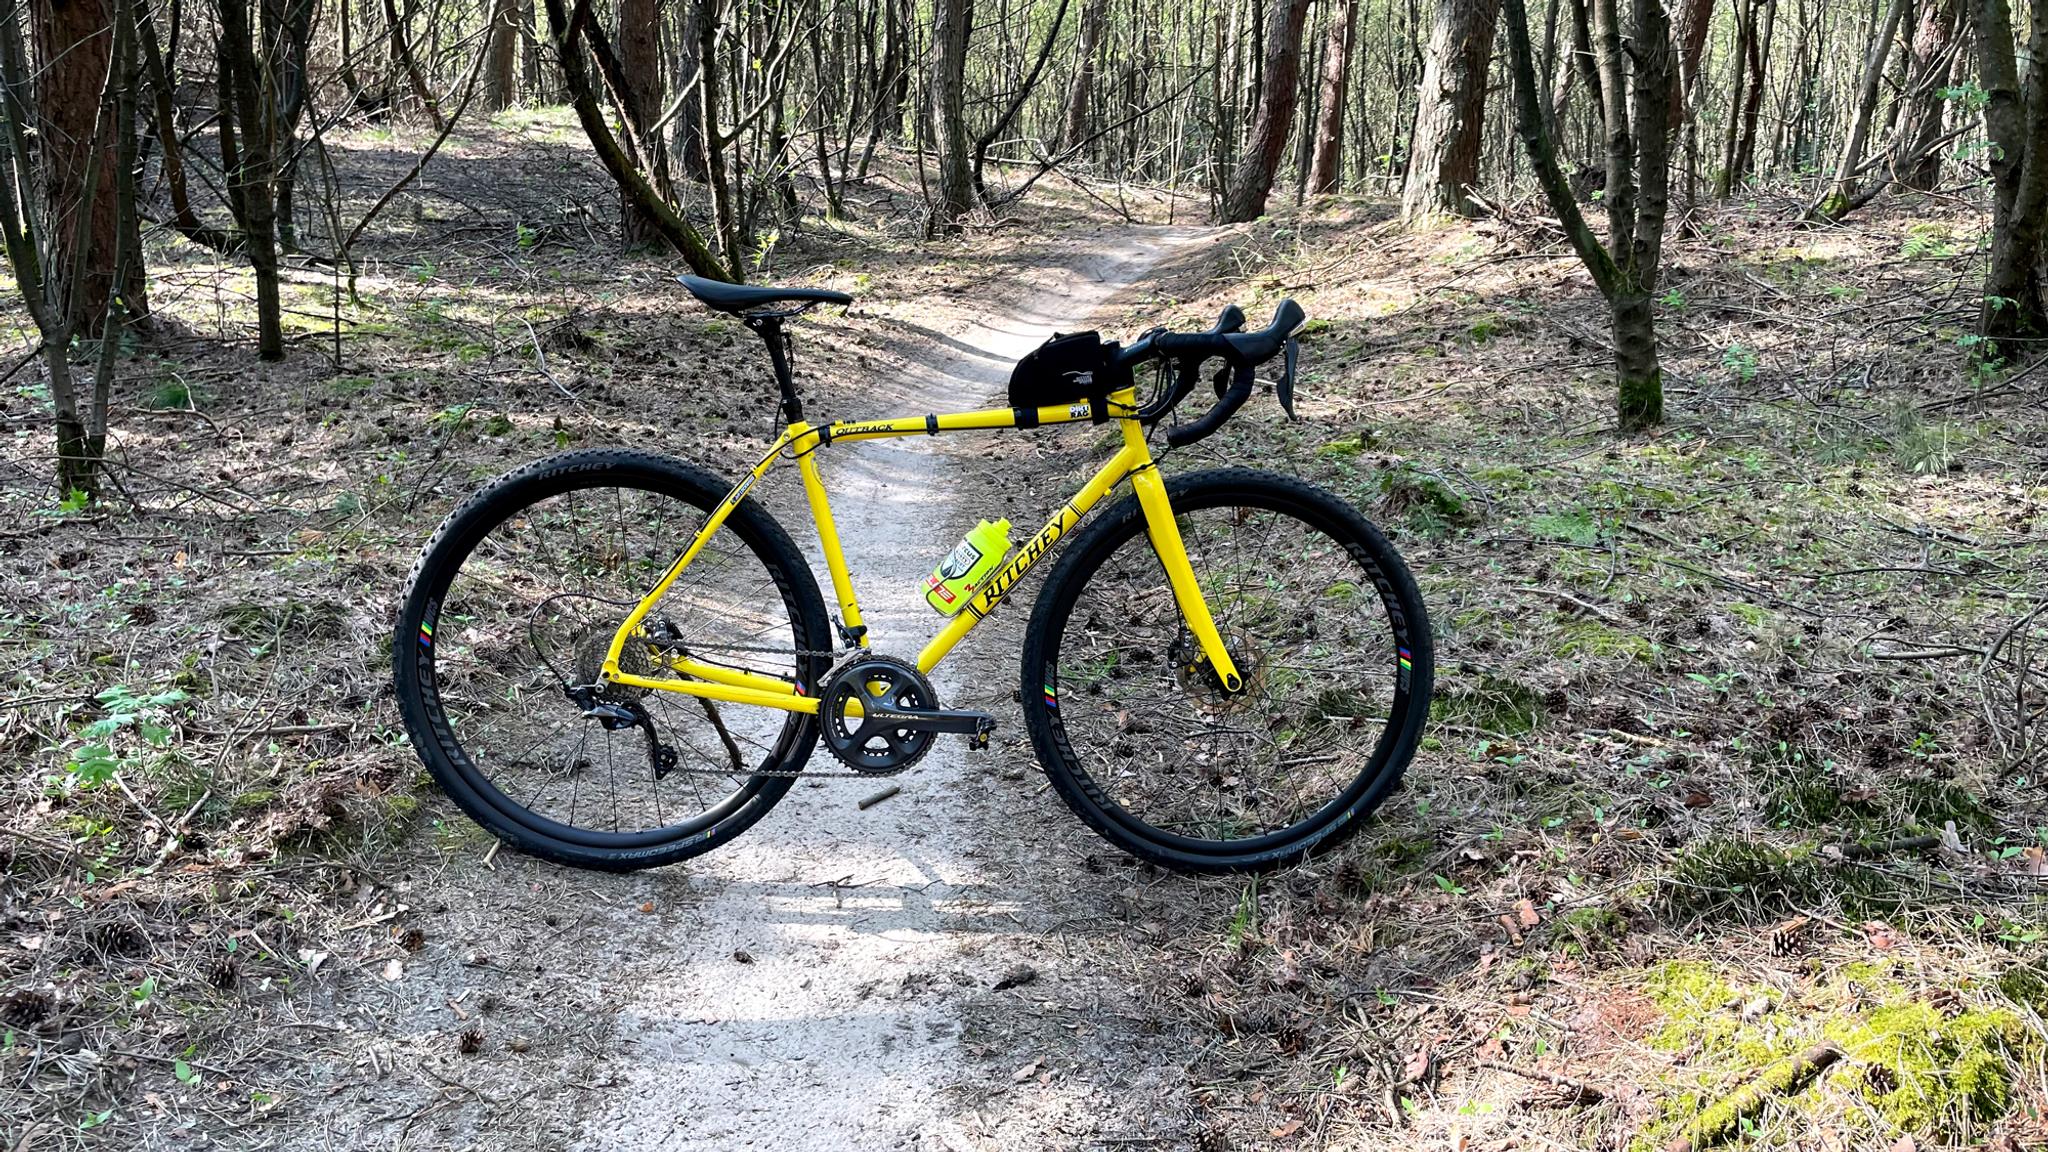 Ritchey Outback